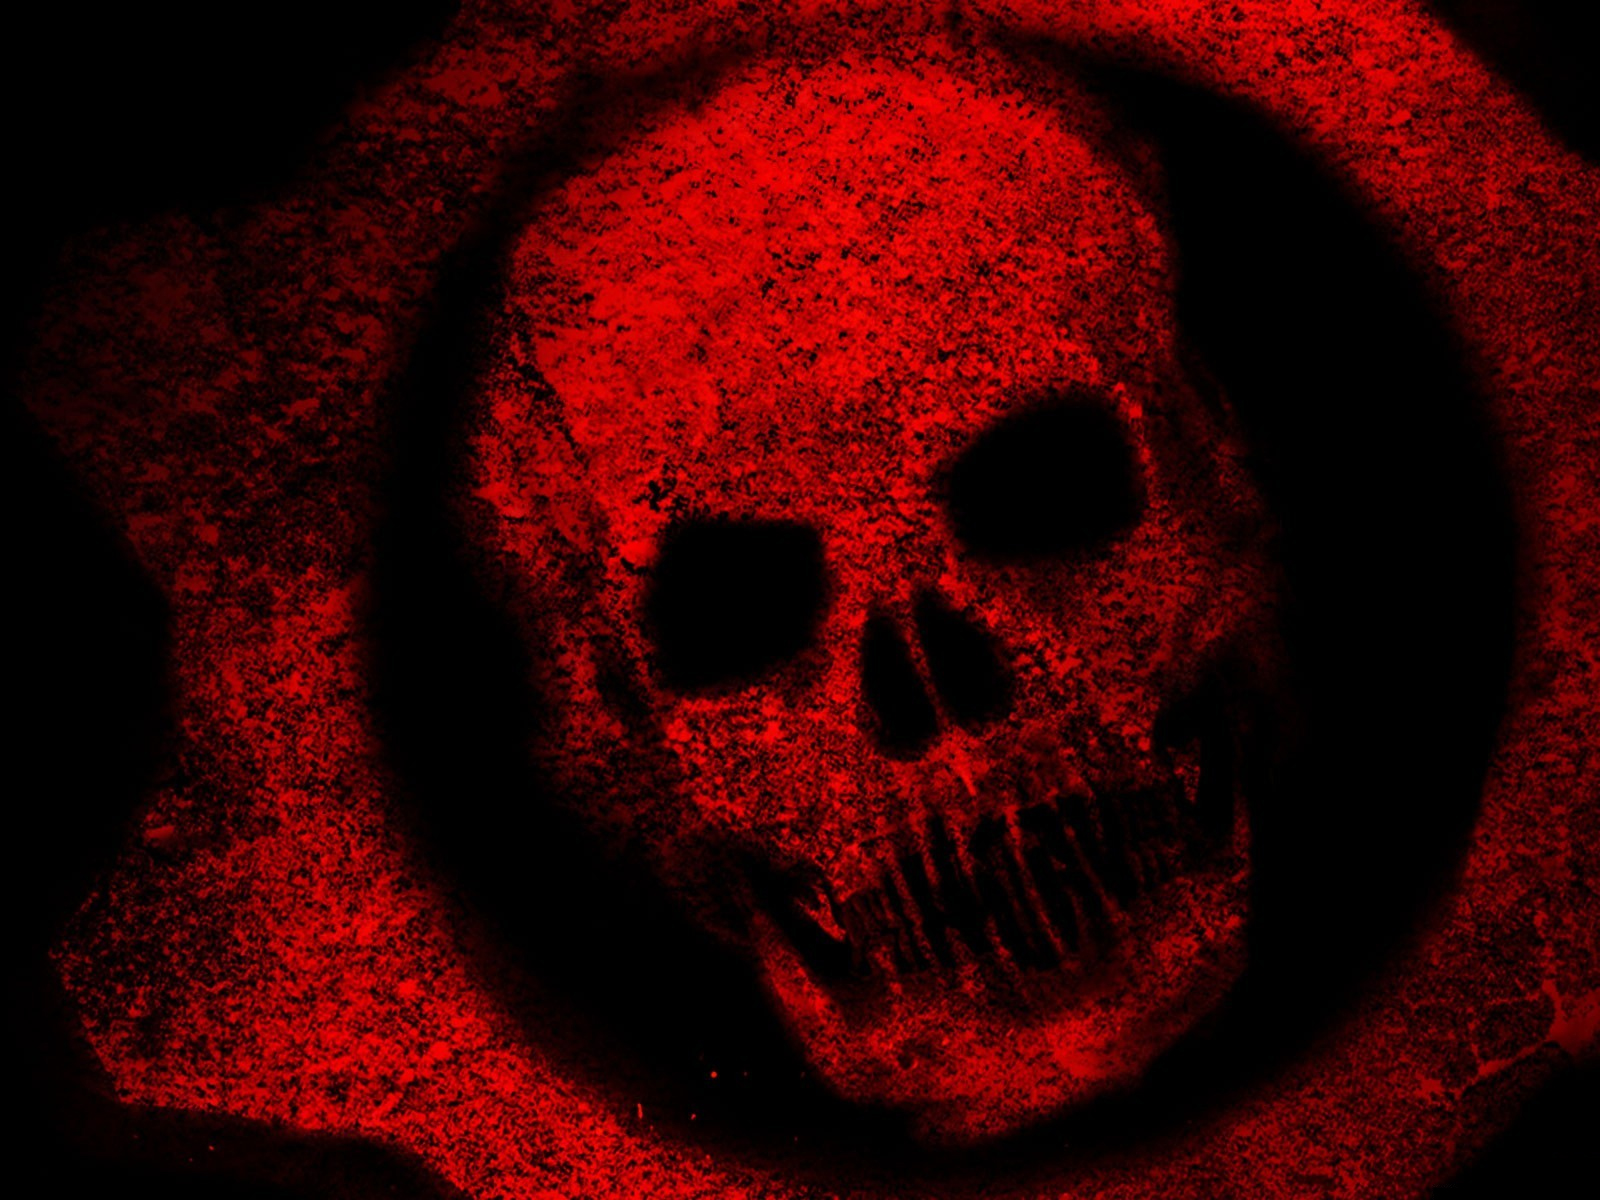 gears of war, video game Free Stock Photo